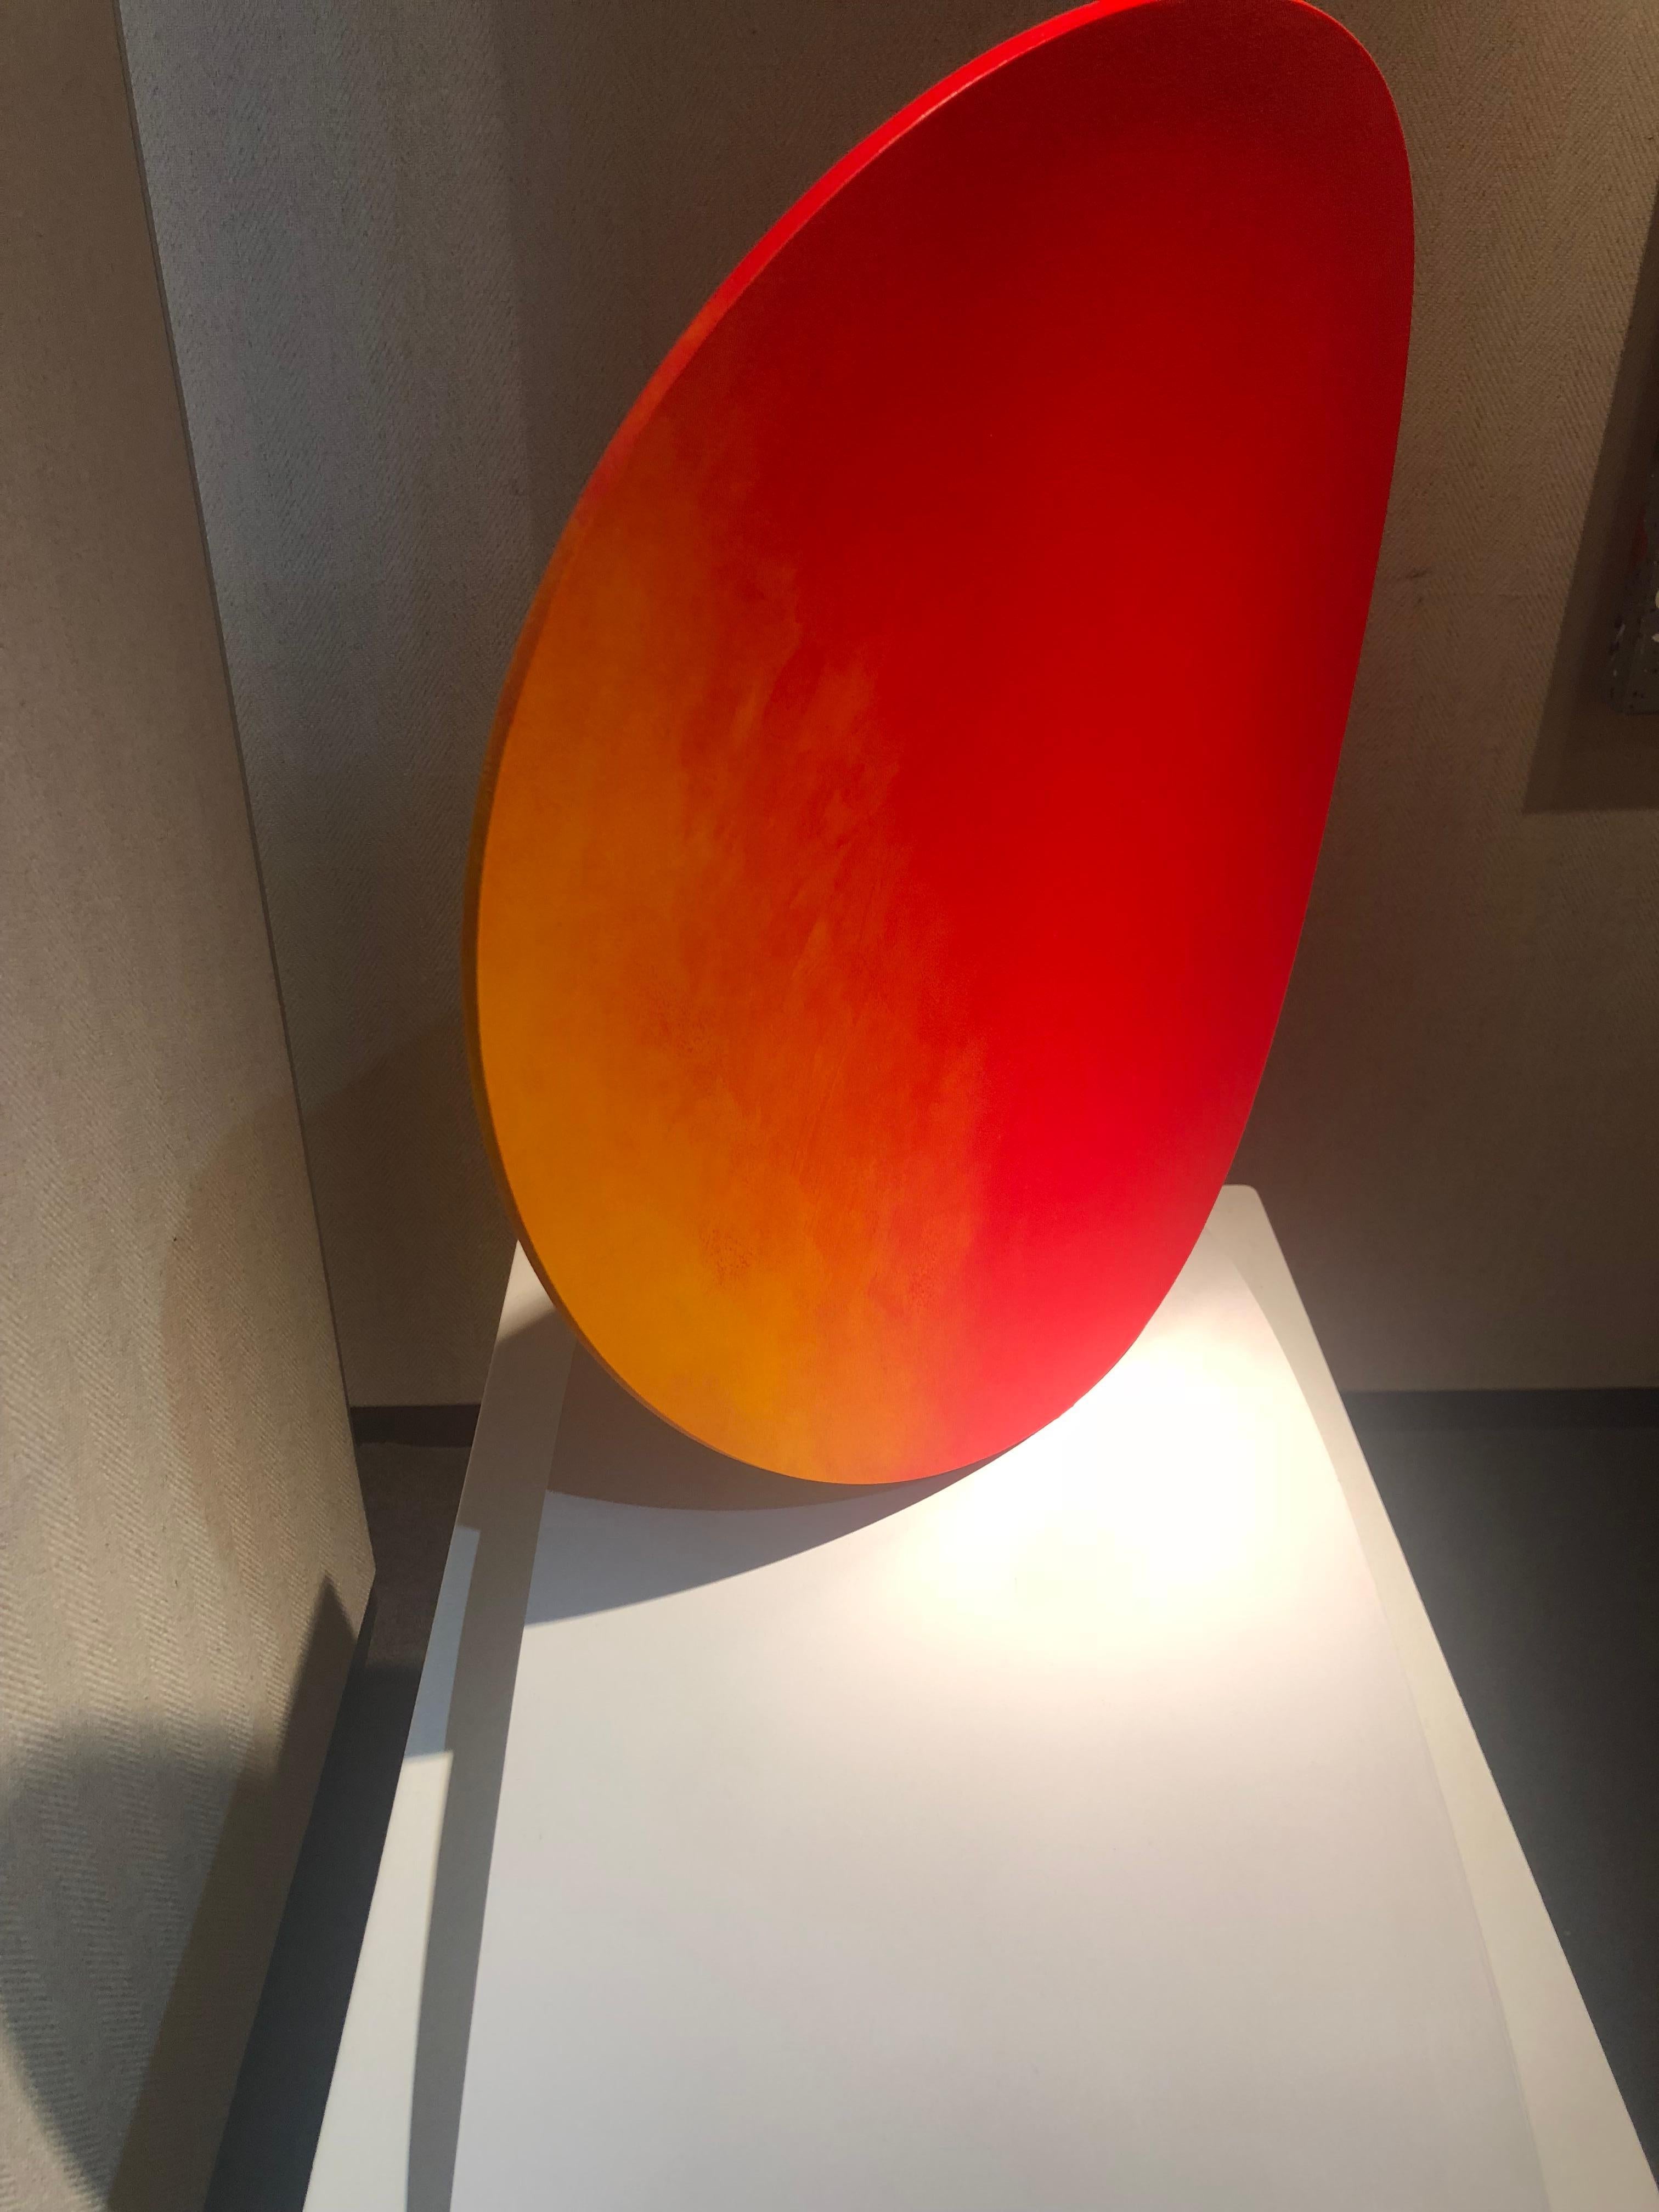 Solar Flare - Gray Abstract Sculpture by Lois Teicher